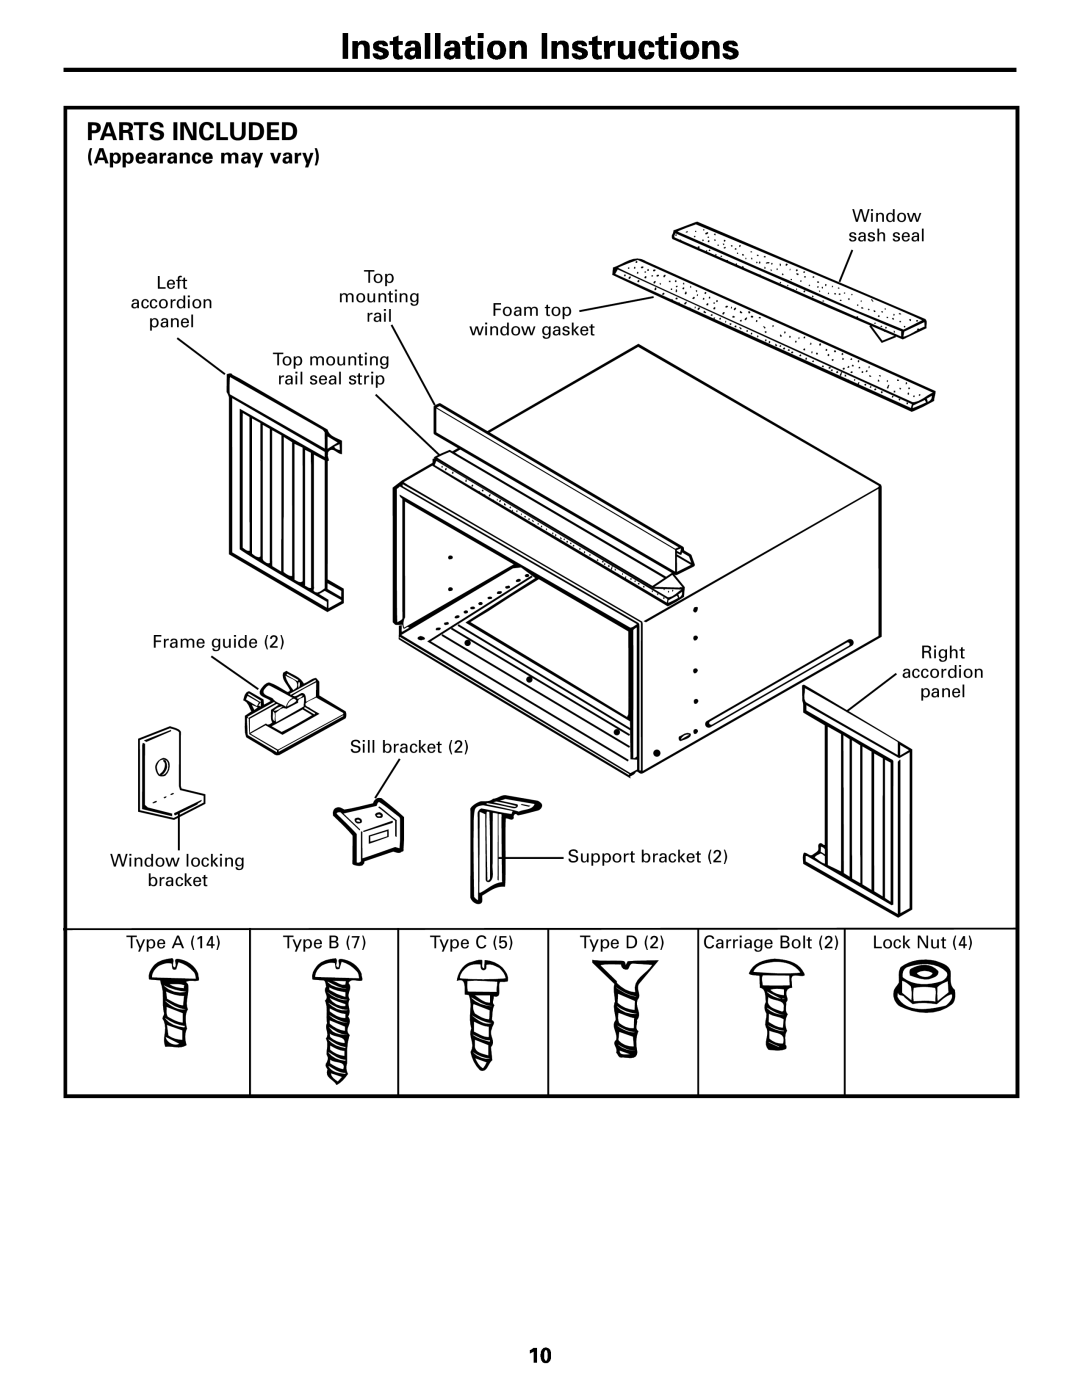 GE AGF18 operating instructions Installation Instructions, Parts Included, Appearance may vary 